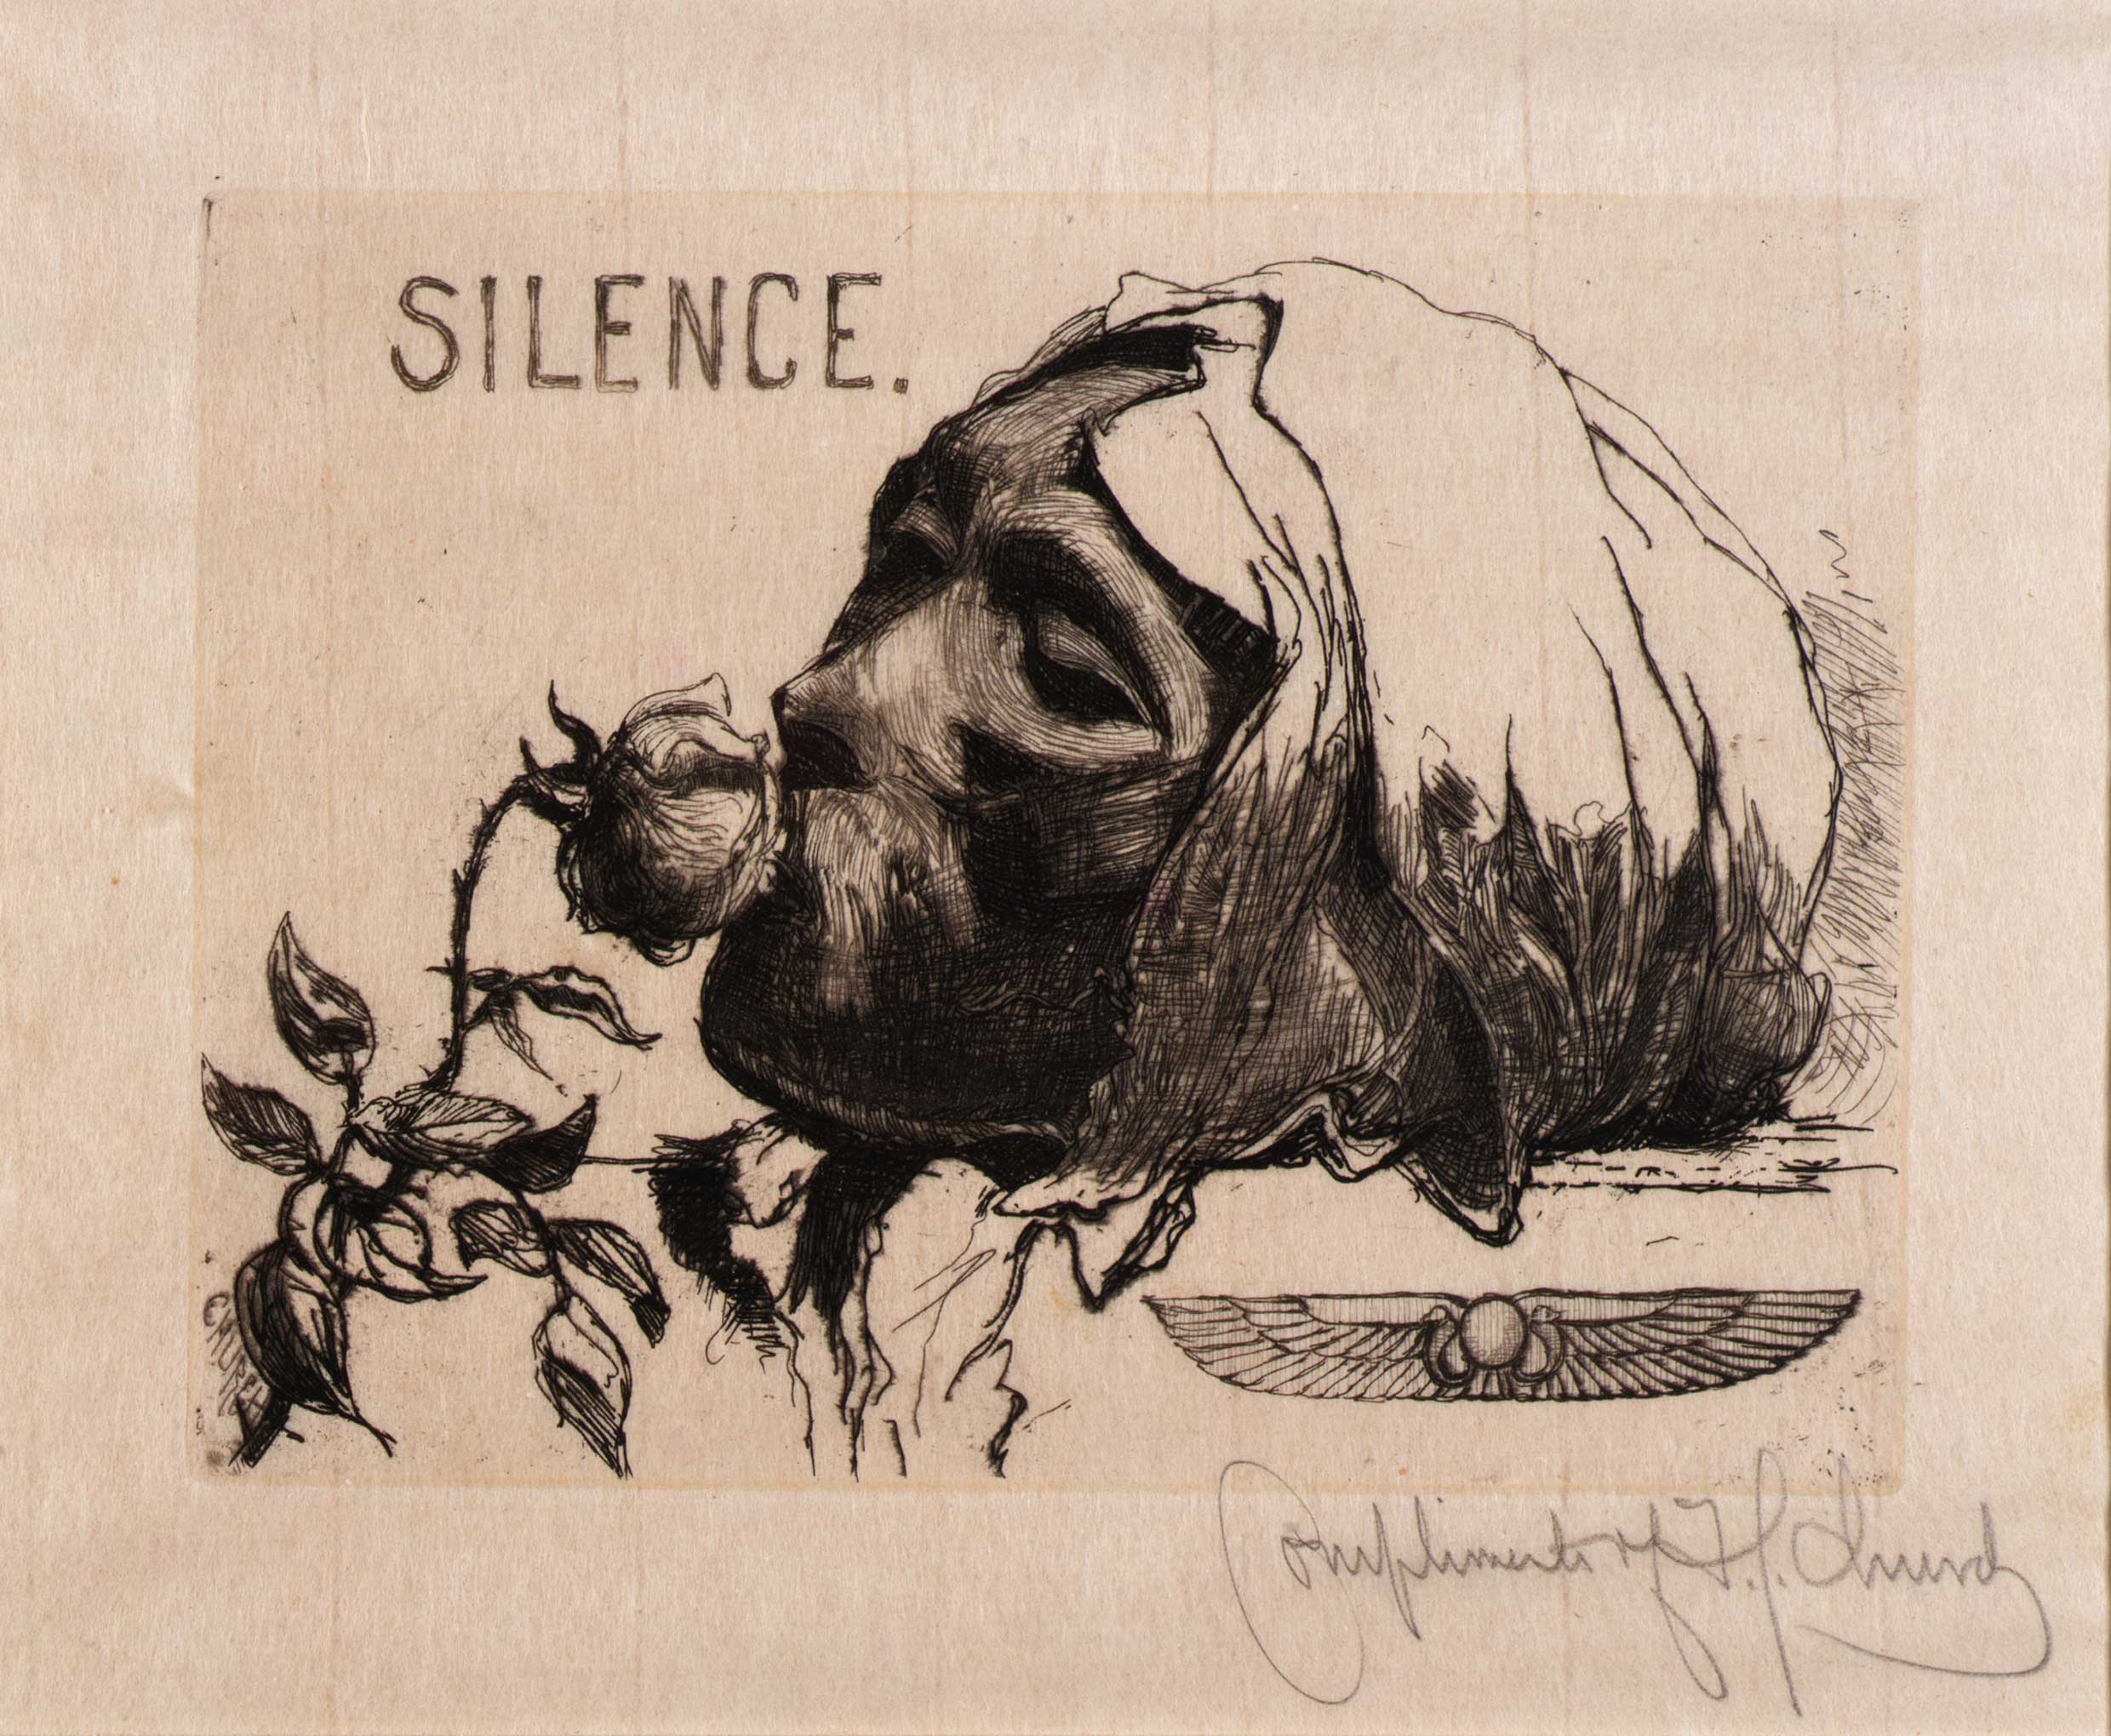 A female head with headscarf is at the centre of this etching in dark pencil or charcoal on brown paper. With eyes closed she smells a long-stemmed rose with leaves. SILENCE. is spelled out and is positioned above her head. To the right and beneath her is a smaller art deco style emblem with wings. The illustrator's large signature is beneath that. 